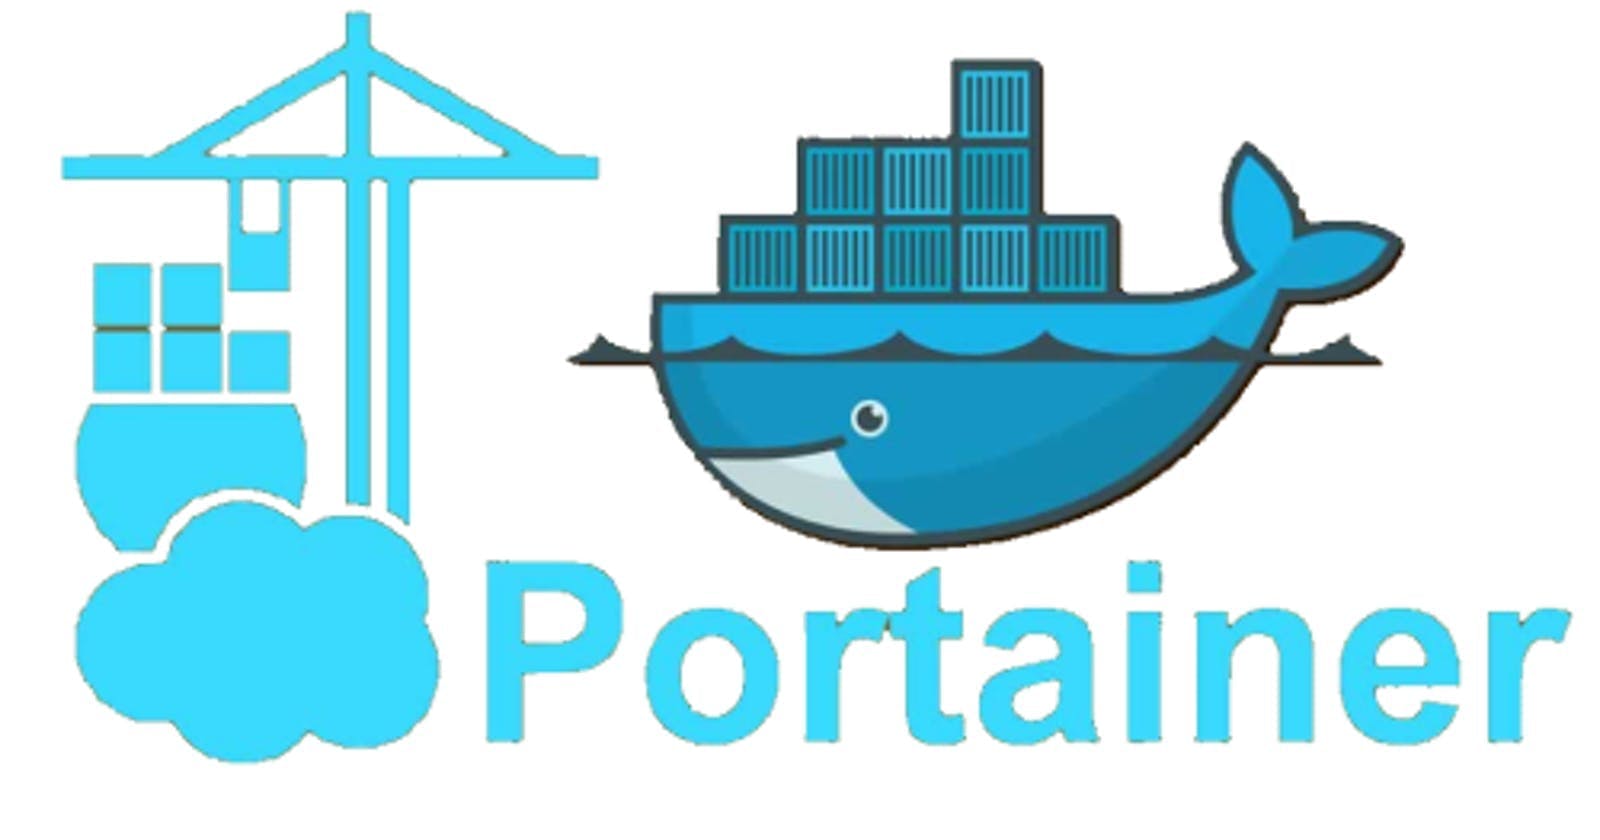 Let's deploy an application in minutes with Portainer